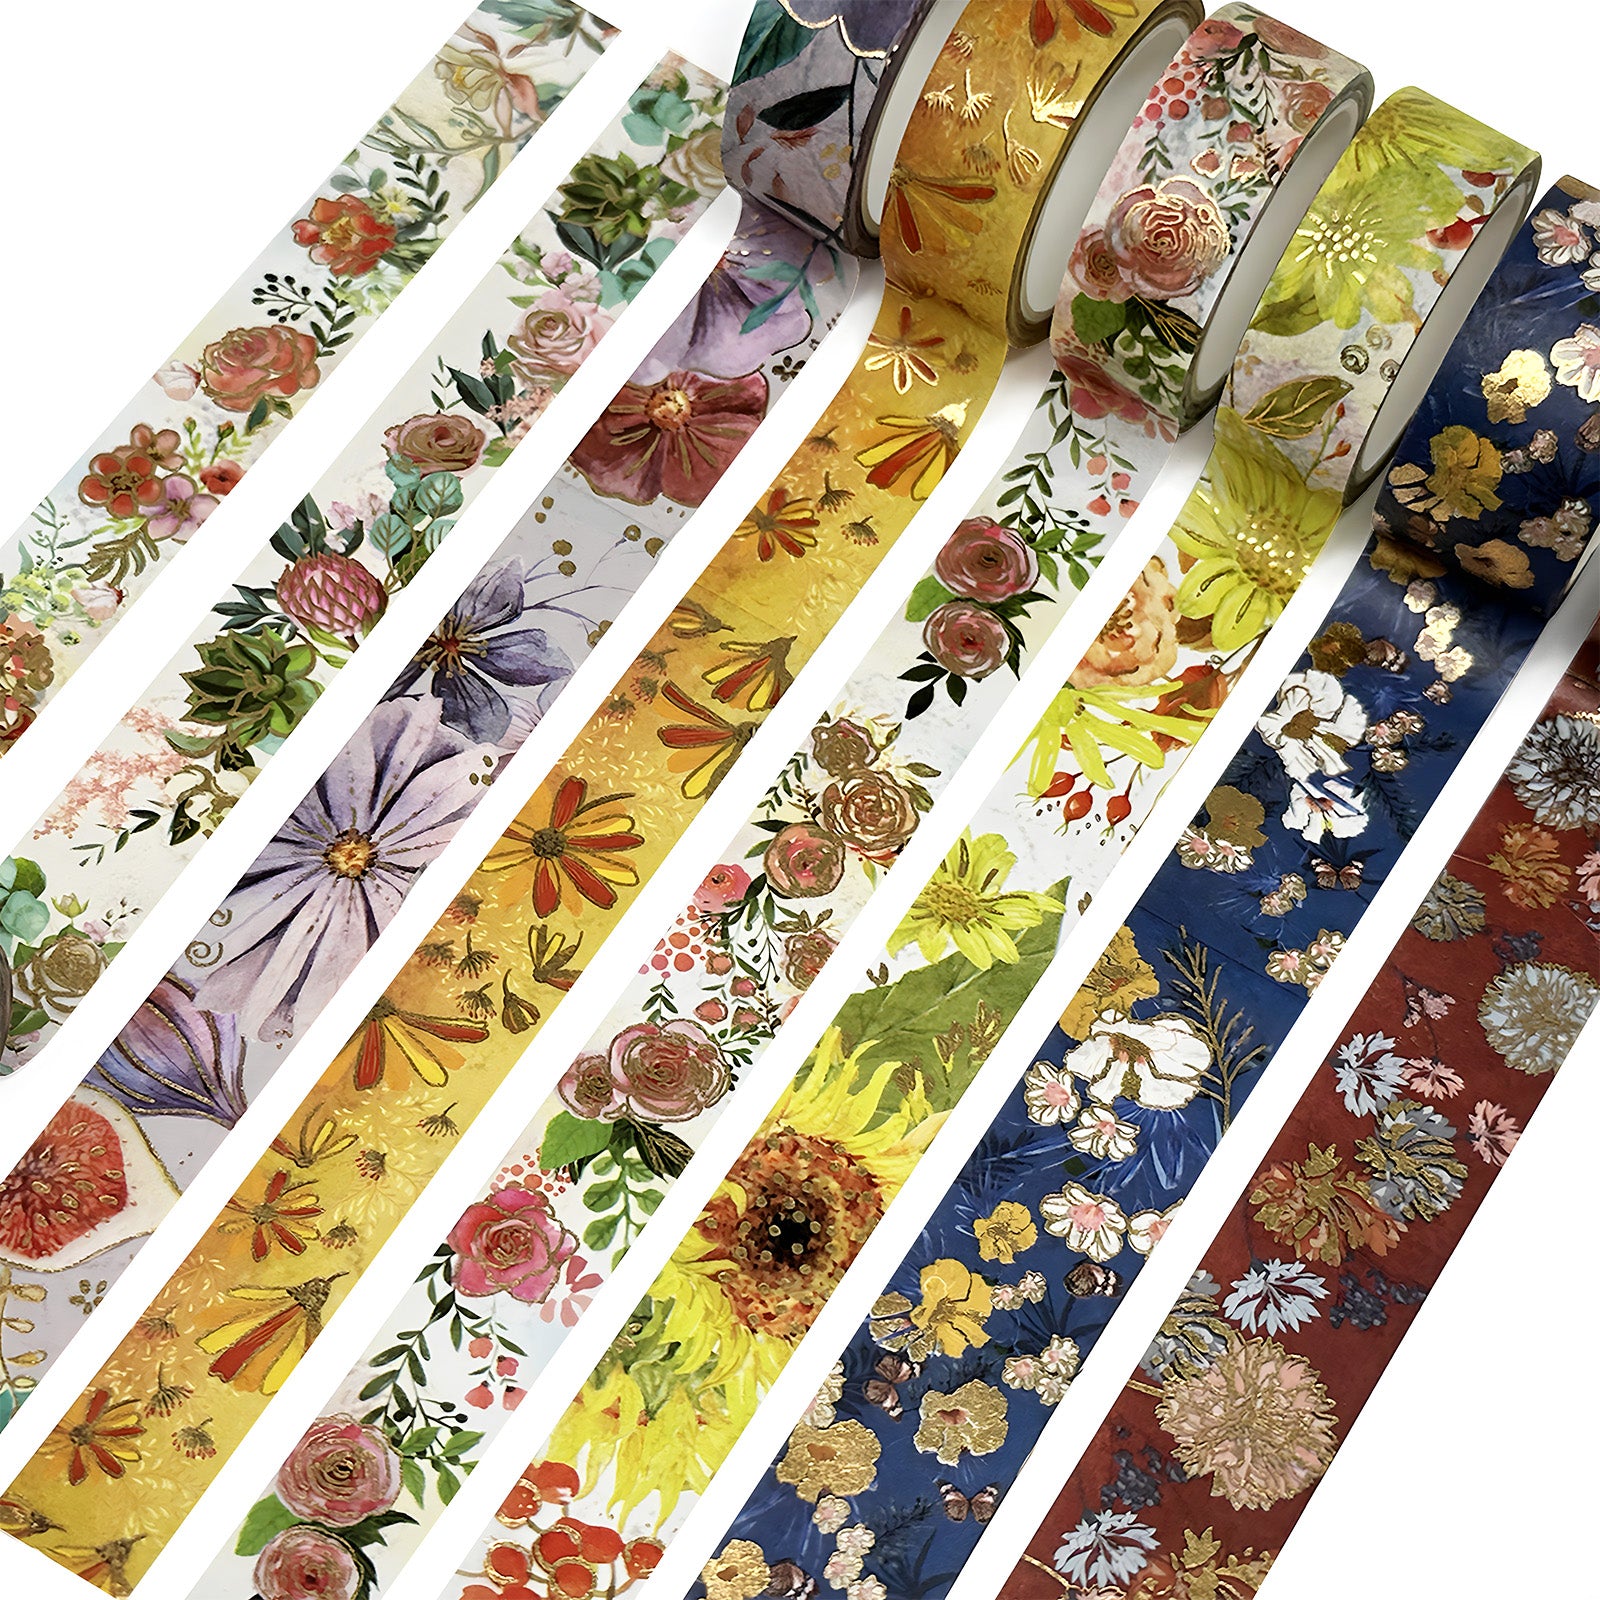  Ciieeo 6 Rolls Hot Stamping Washi Tape Handmade Stickers DIY  Crafts Animal Stickers Scrapbooking Tape Ancient Style Gold Washi Tape for  Journaling Decorative Tapes Party Supplies Ocean : Arts, Crafts 